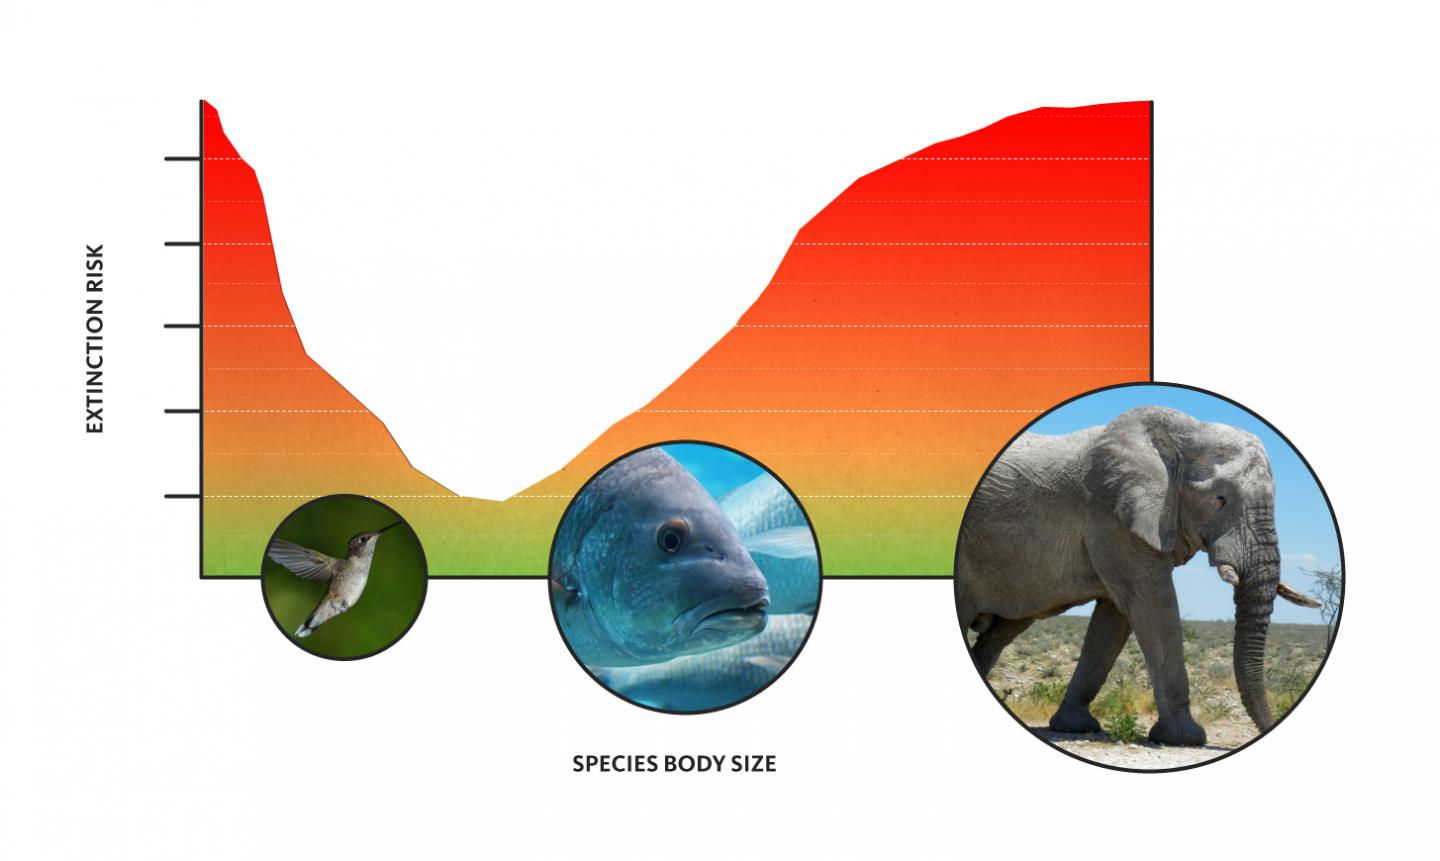 Illustration Showing Animal Extinction Risks from Small to Large Body Sizes